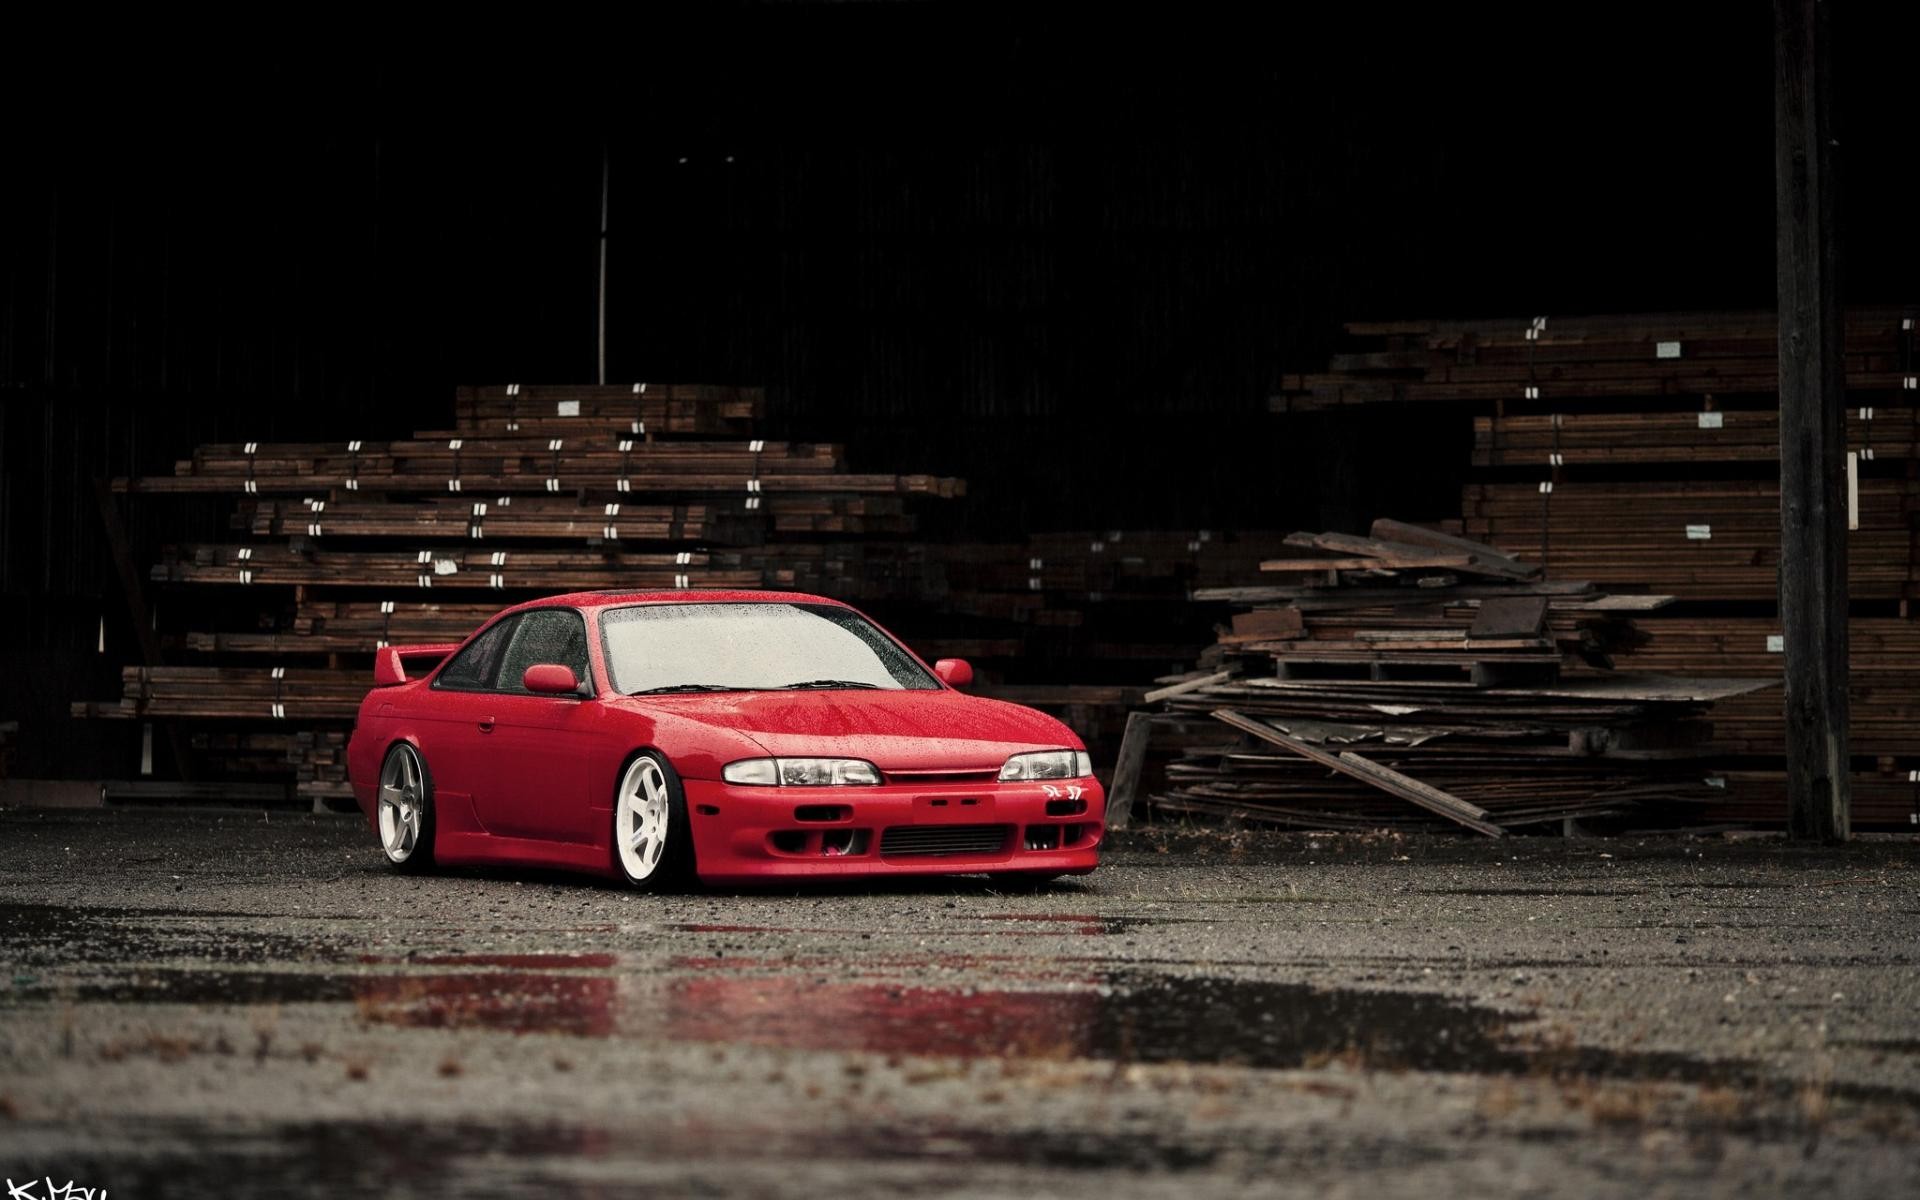 General 1920x1200 Japanese cars stance (cars) Nissan Nissan Silvia car vehicle red cars car spoiler